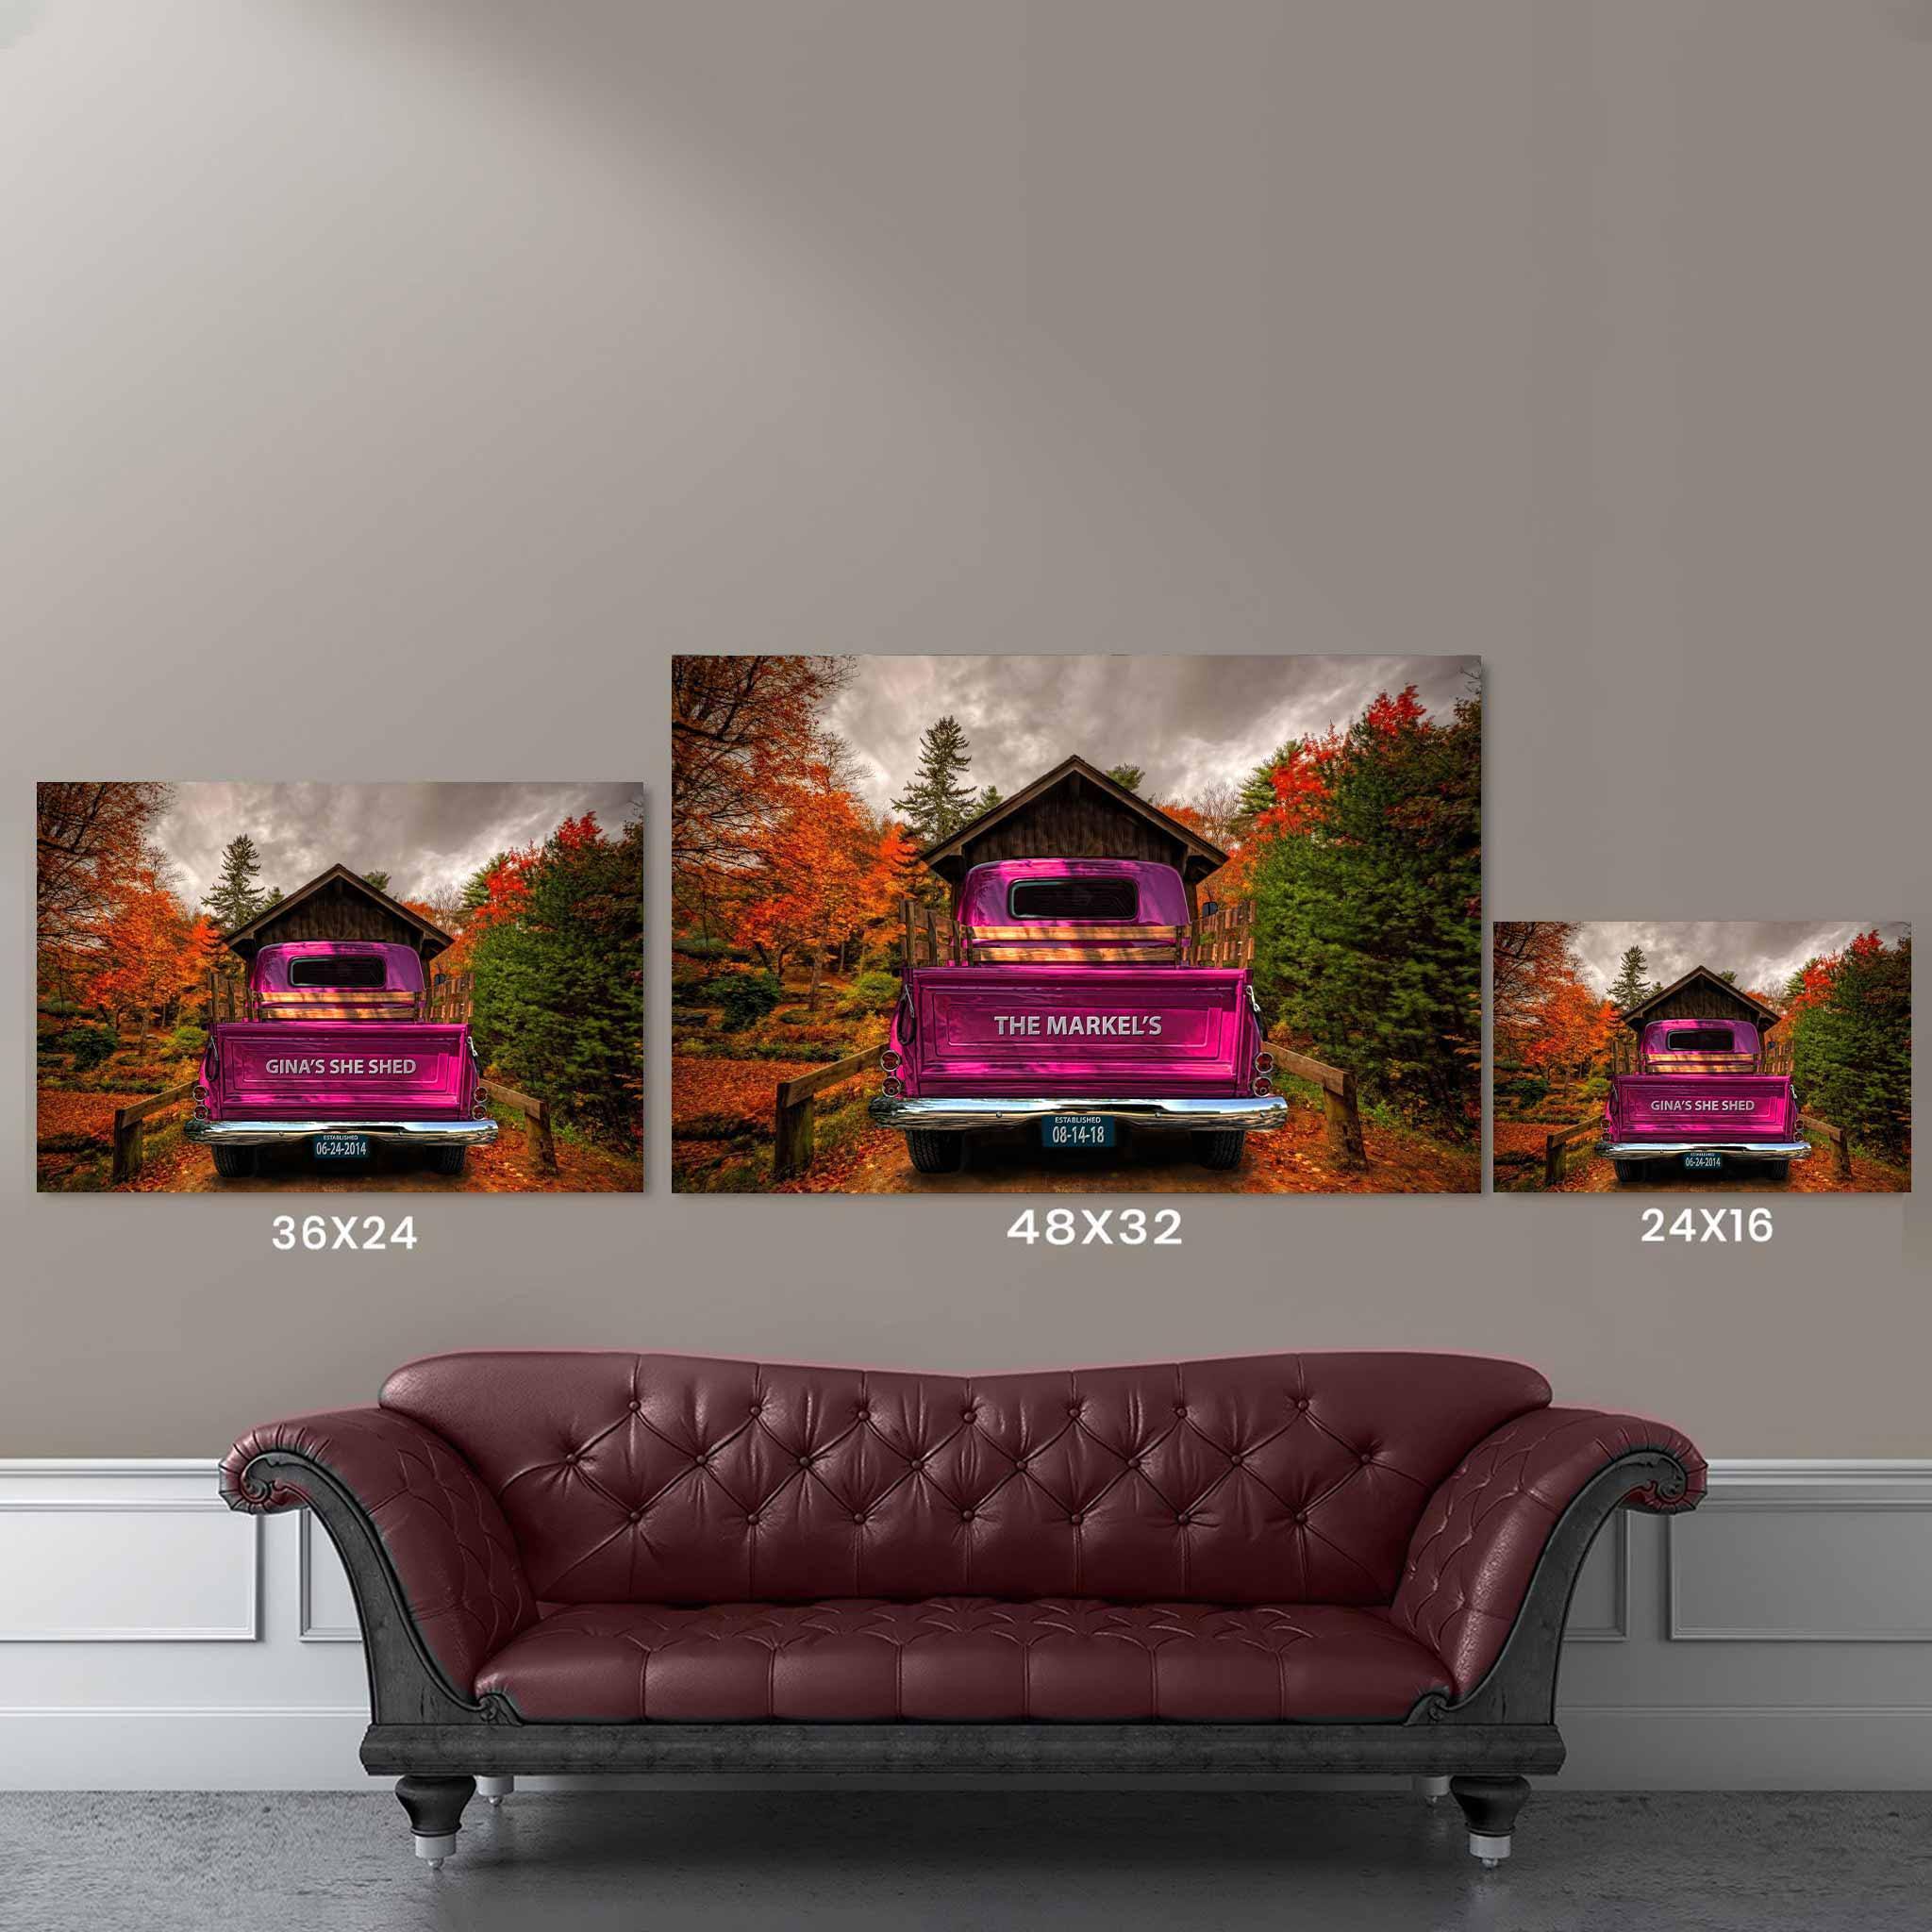 Vintage Truck (Hot Pink) On Covered Bridge Personalized Tailgate & License Plate CanvasCustomly Gifts